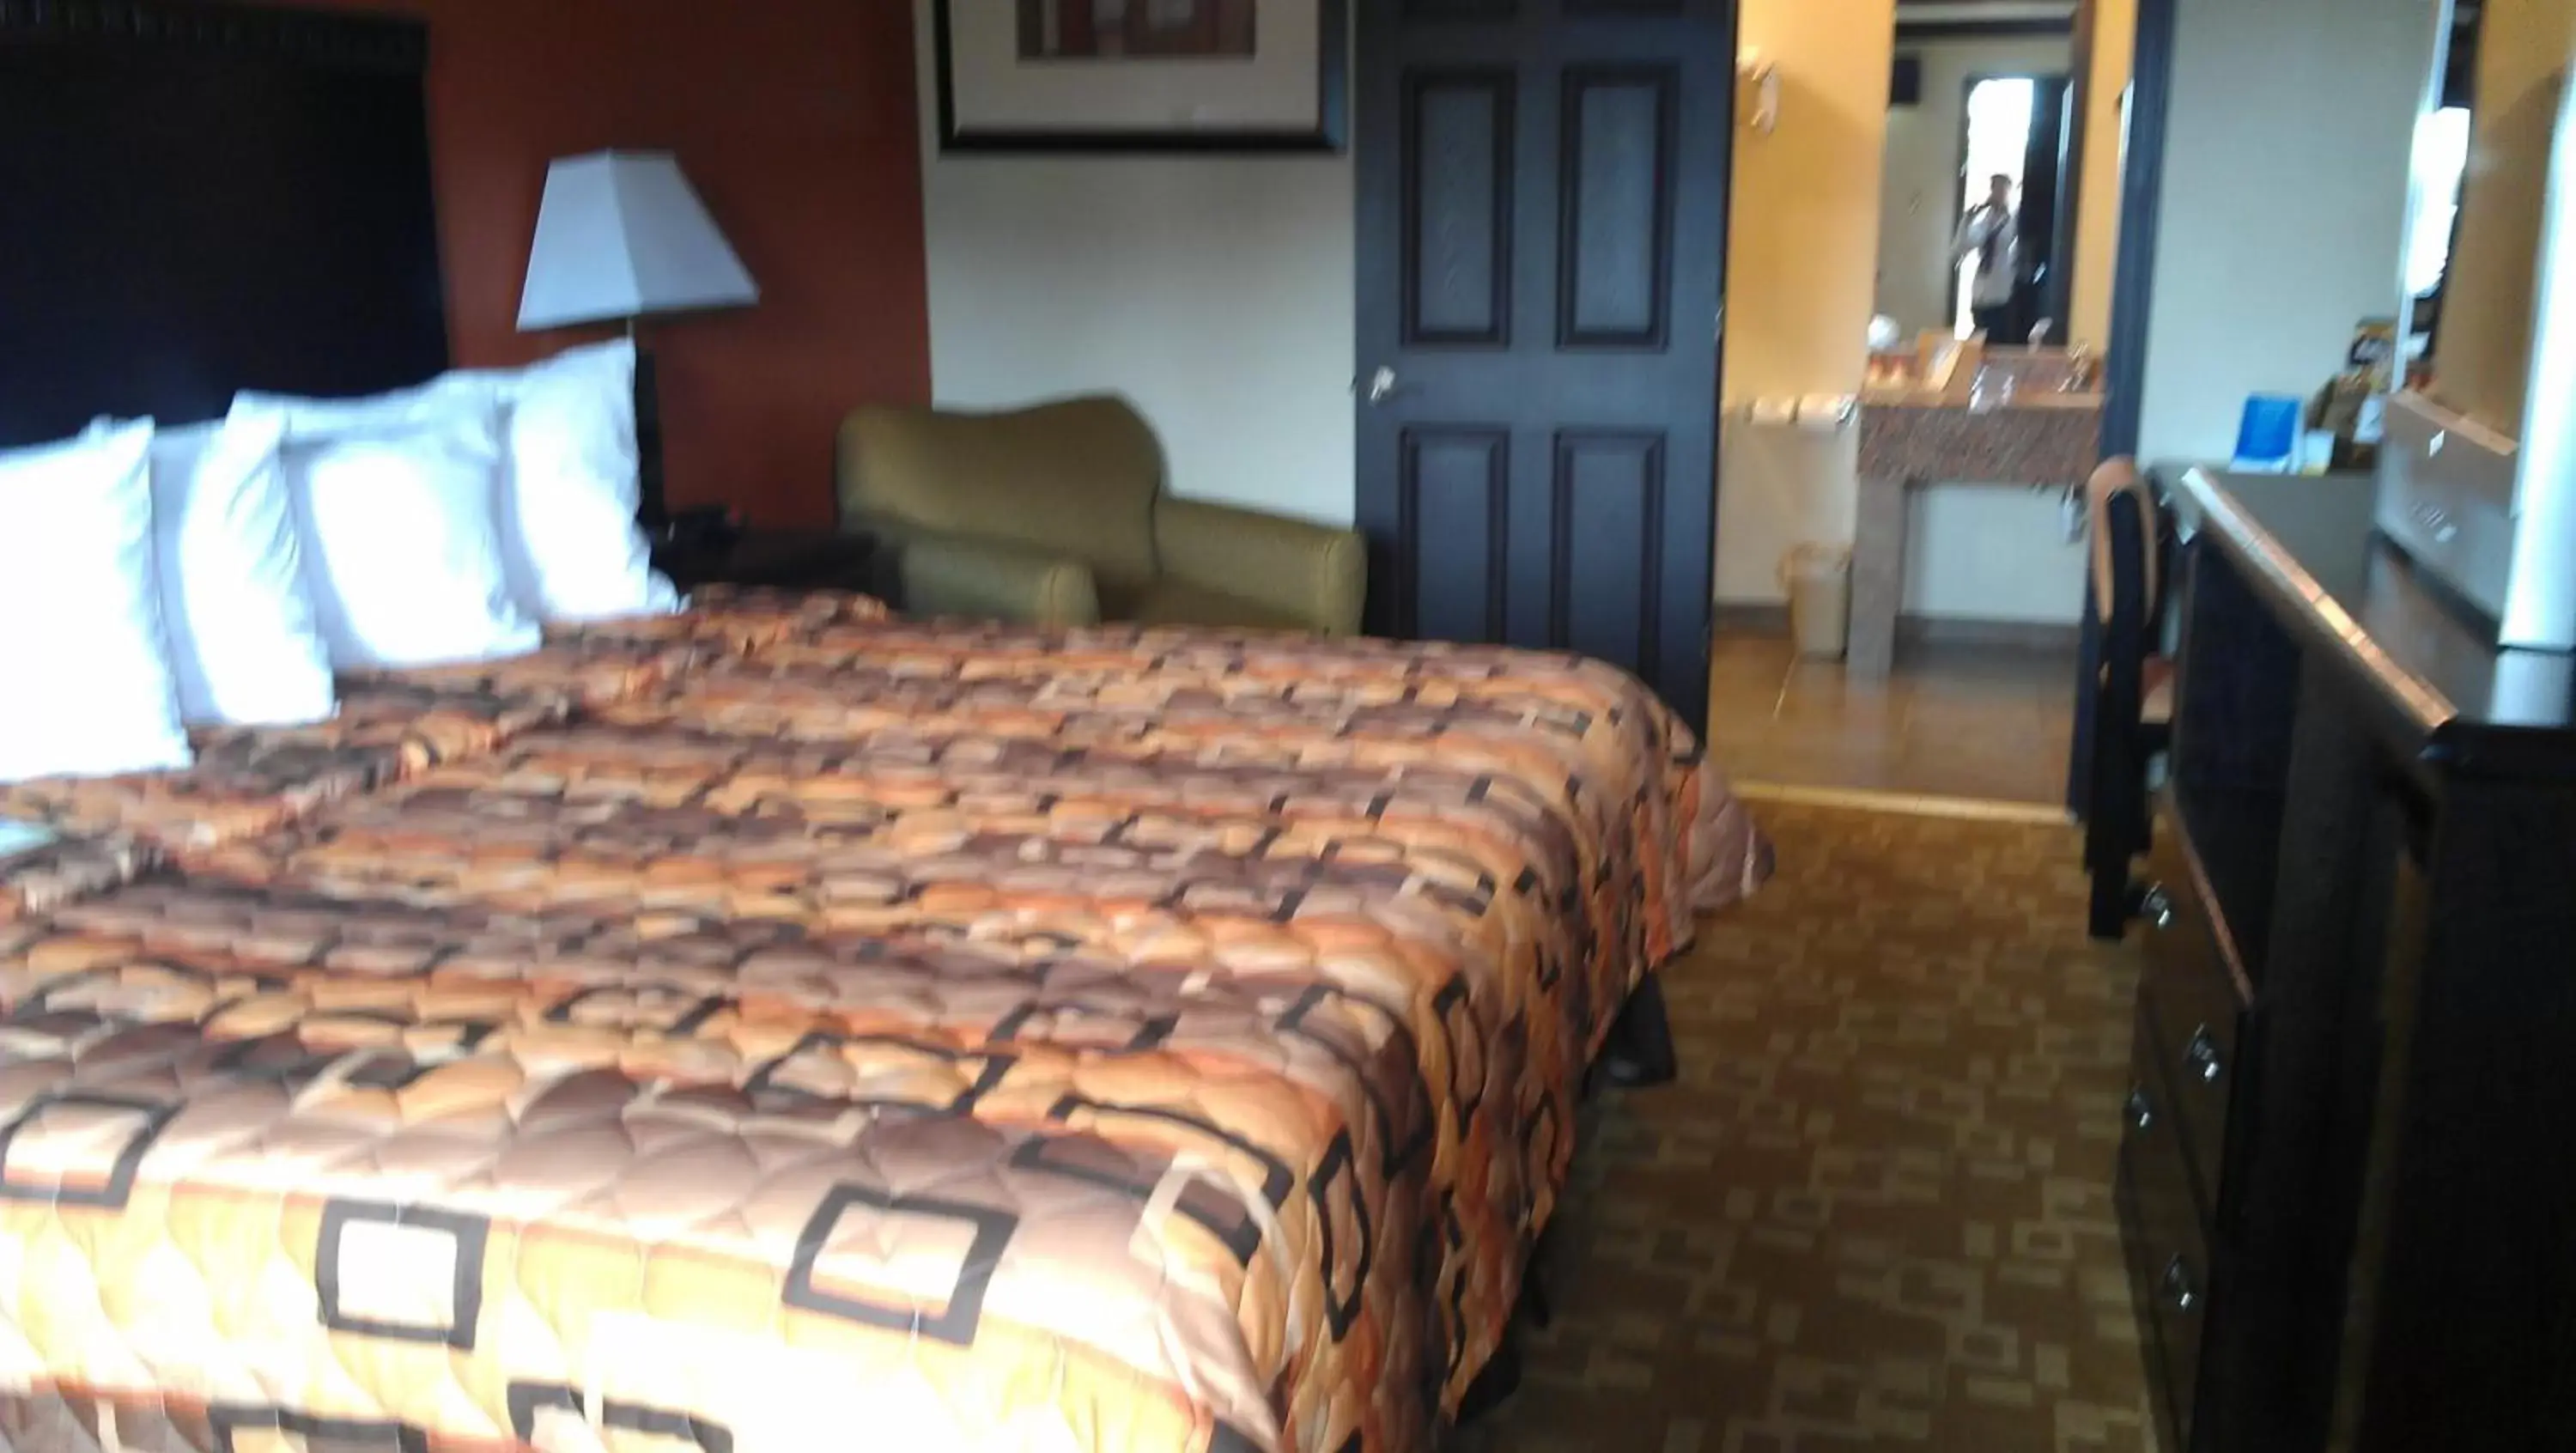 Deluxe King Room - Smoking in Days Inn by Wyndham Oklahoma City/Moore